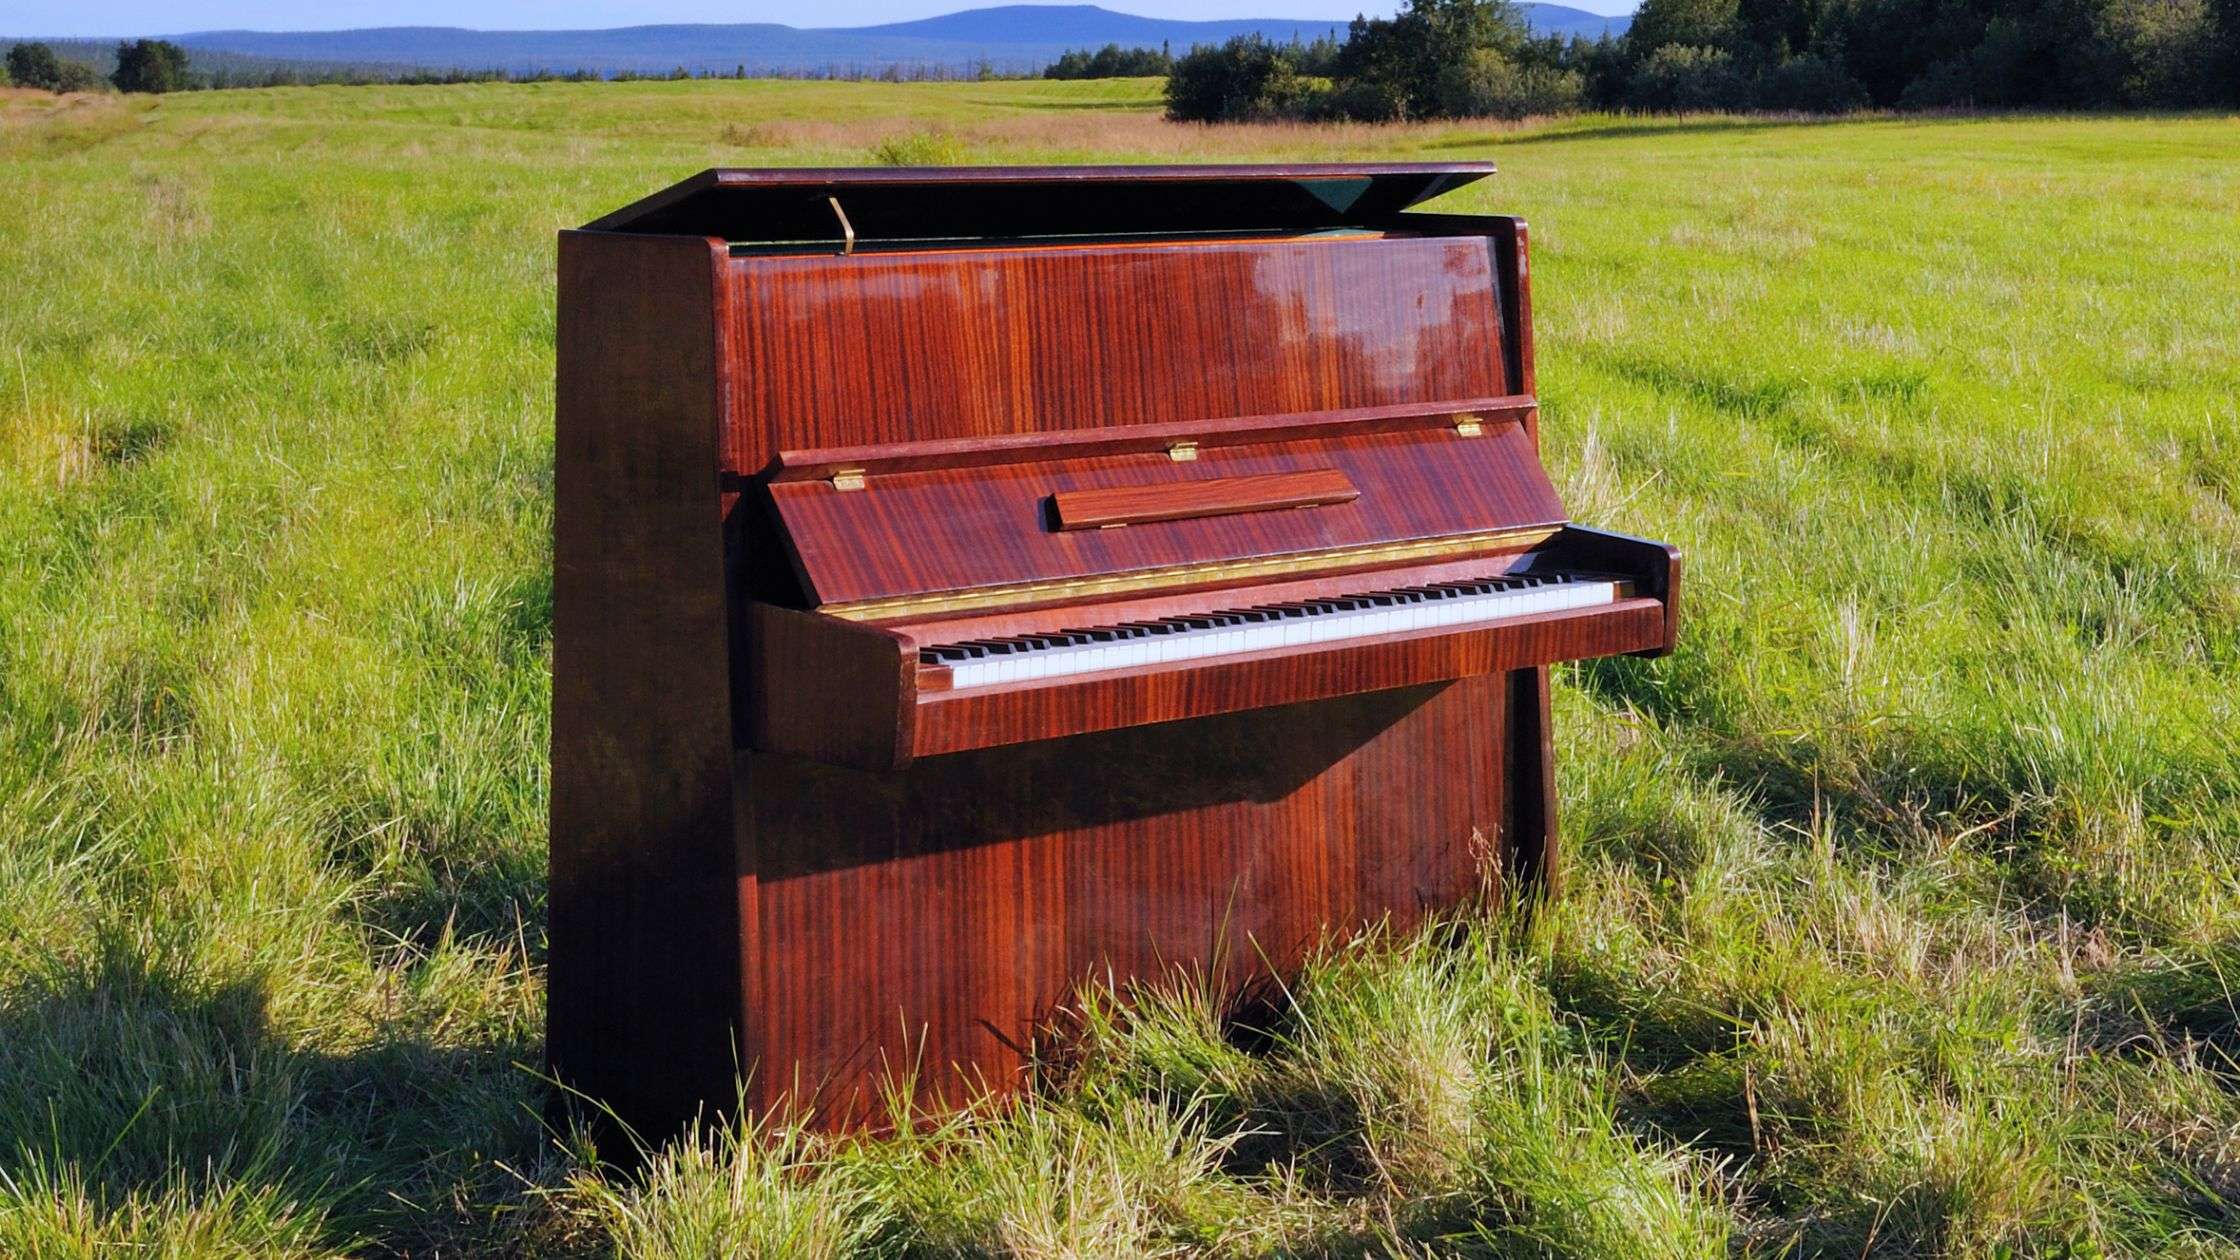 How To Sell Pianos Online, Step by Step (Free Method)